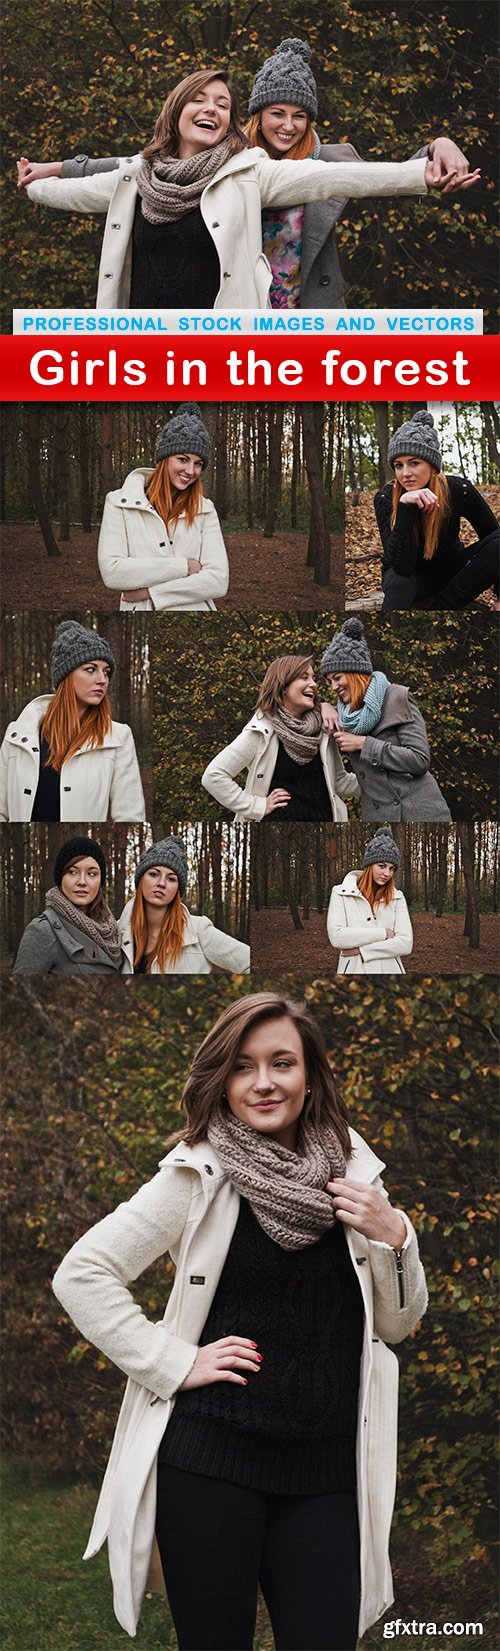 Girls in the forest - 8 UHQ JPEG